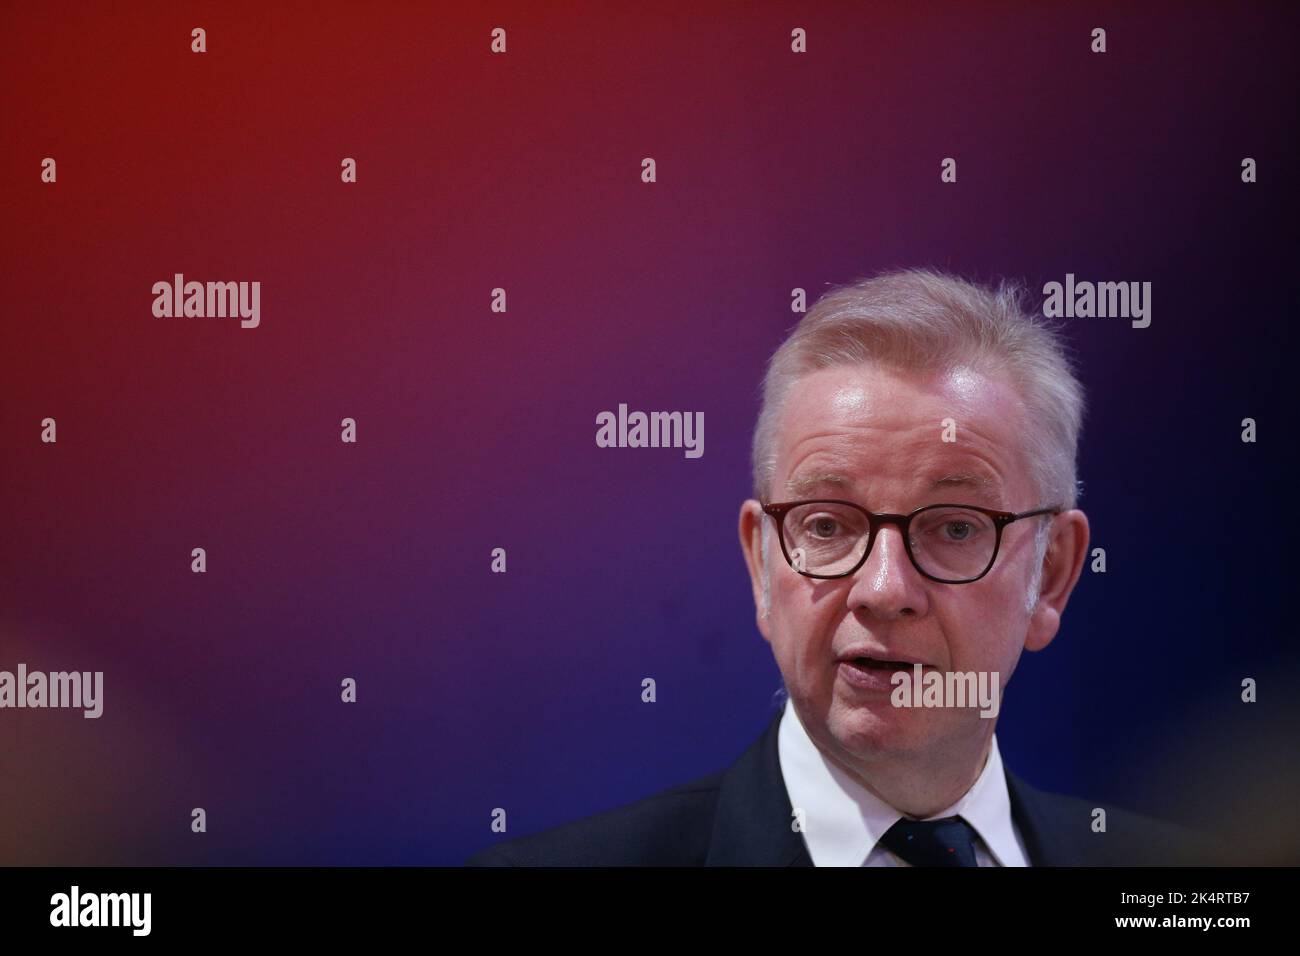 London, UK. 3 October, 2022. Conservative MP Michael Gove speaks during the Conservative Party's annual conference at the International Convention Centre in Birmingham. Picture date: Monday October 3, 2022. Credit: Isabel Infantes/Empics/Alamy Live News Stock Photo